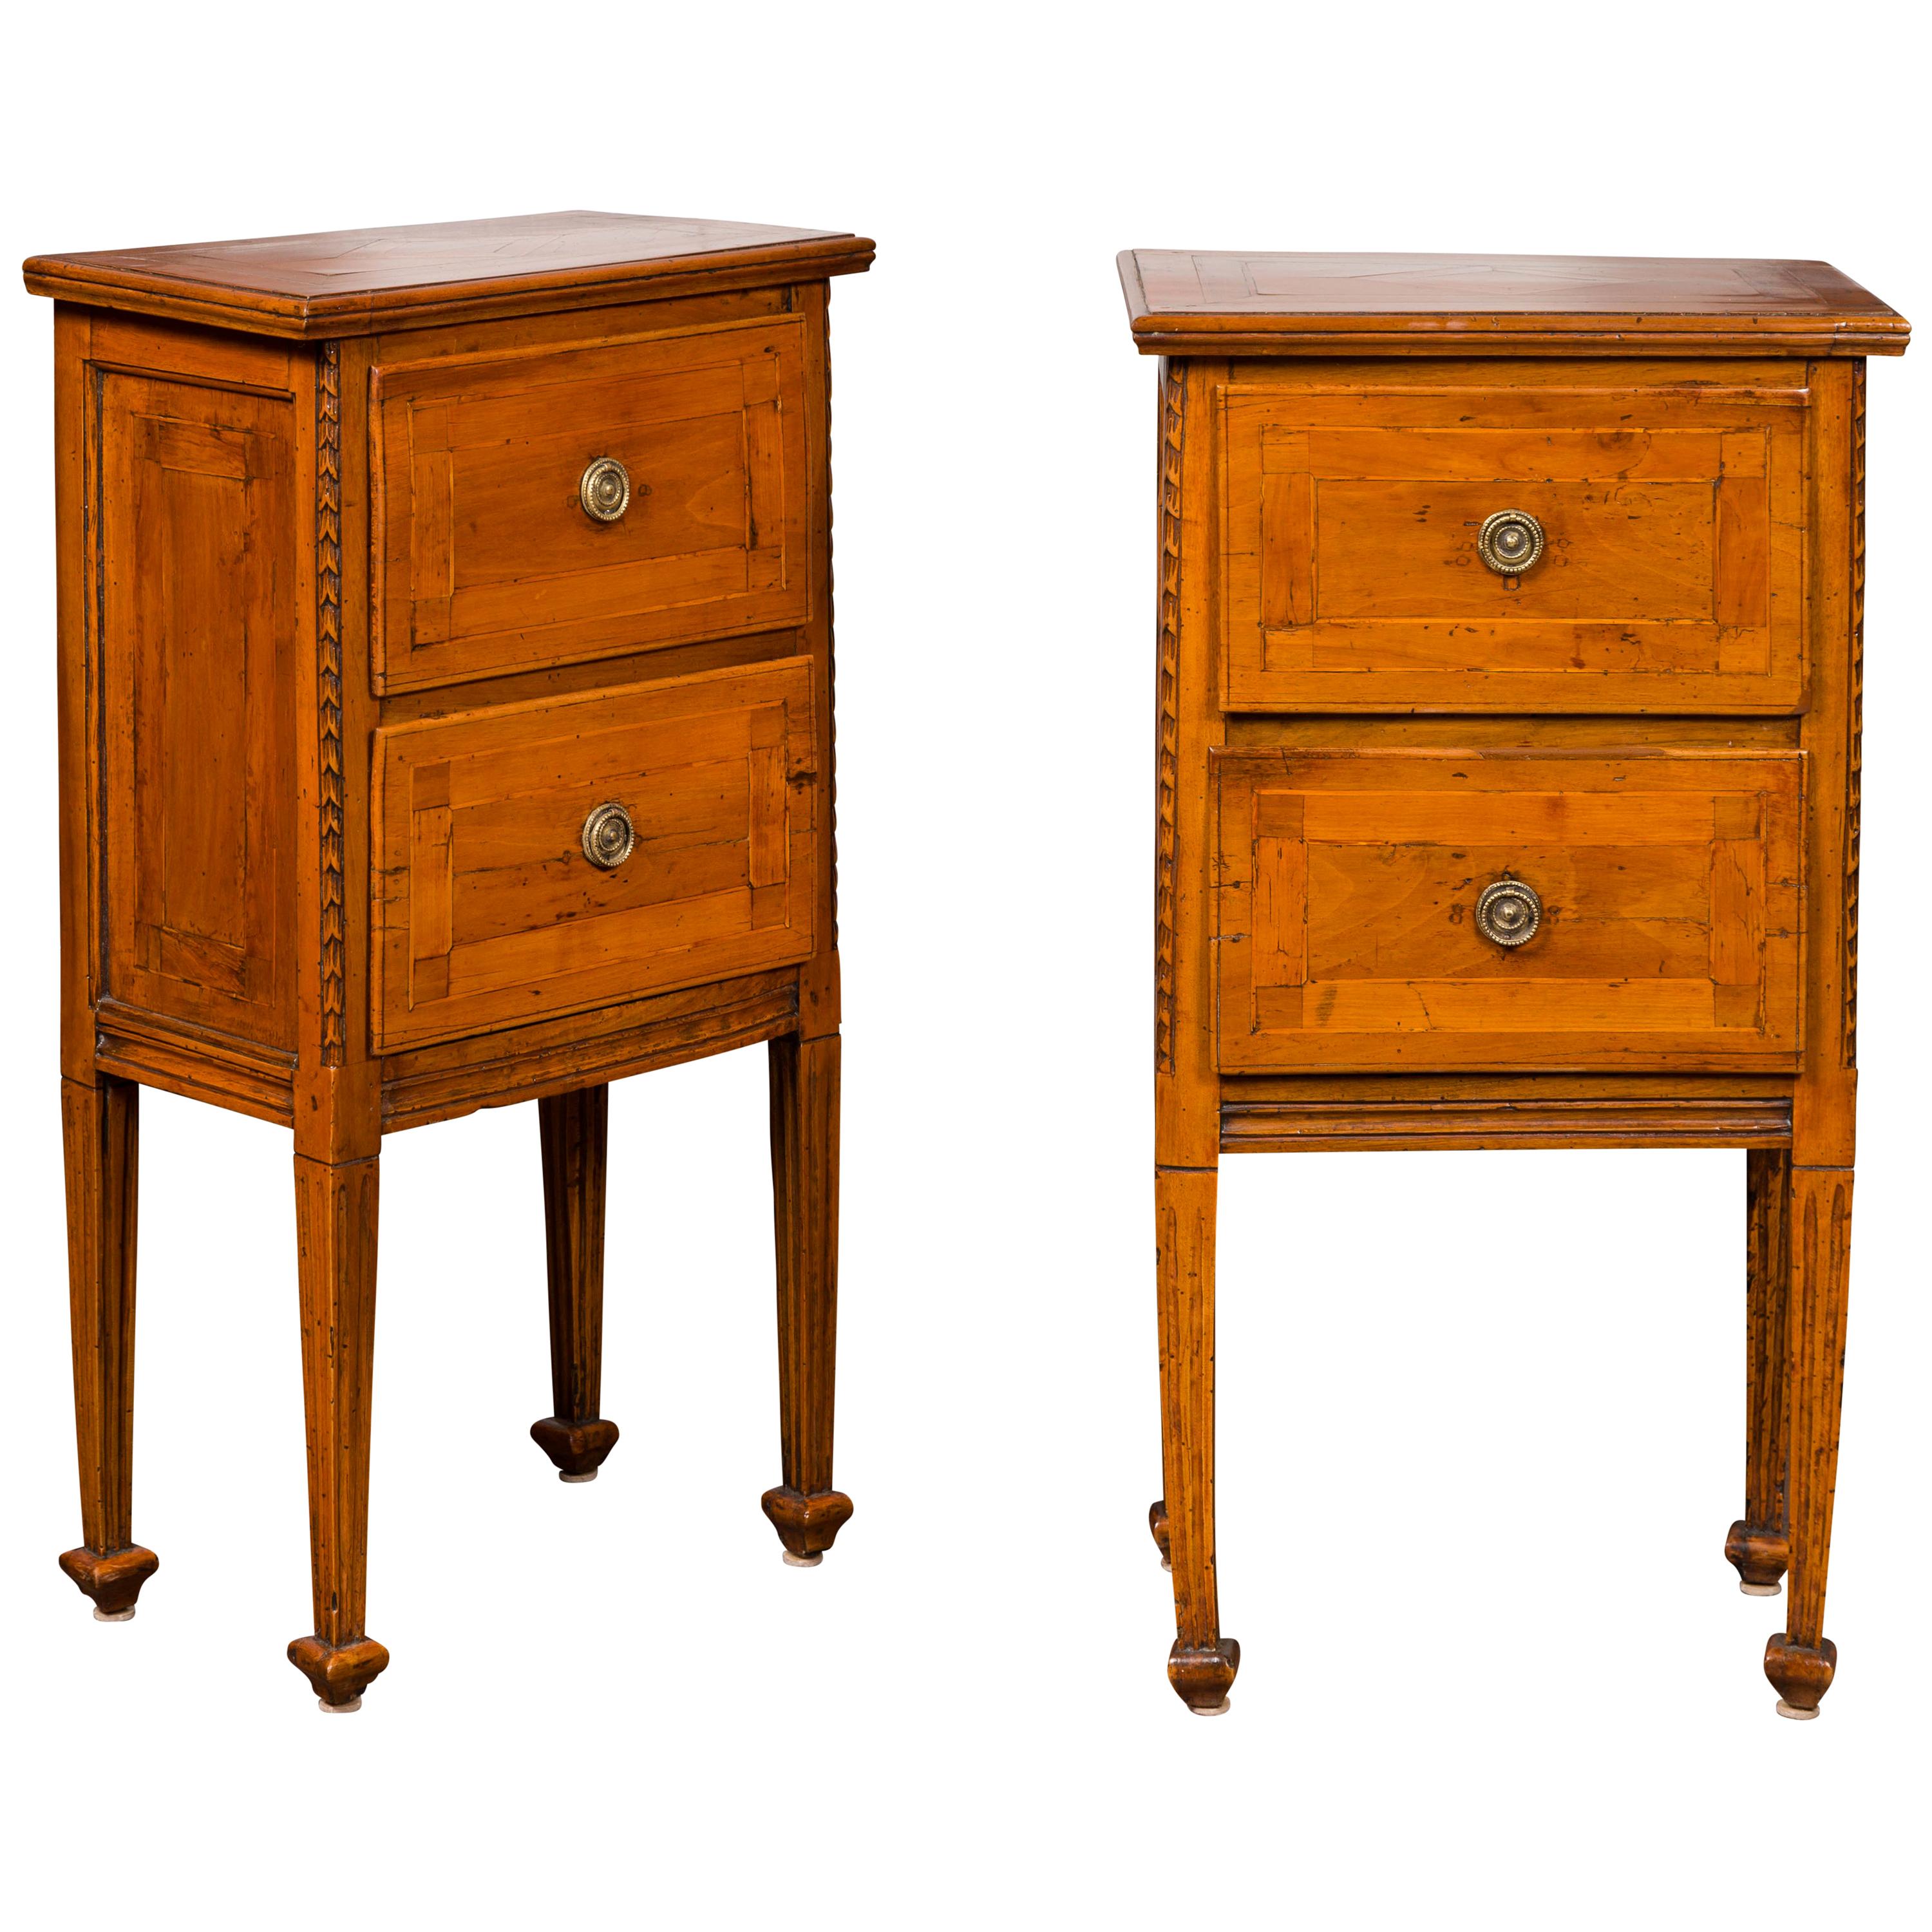 Pair of 1820s Italian Neoclassical Carved Walnut Bedside Tables with Banding For Sale